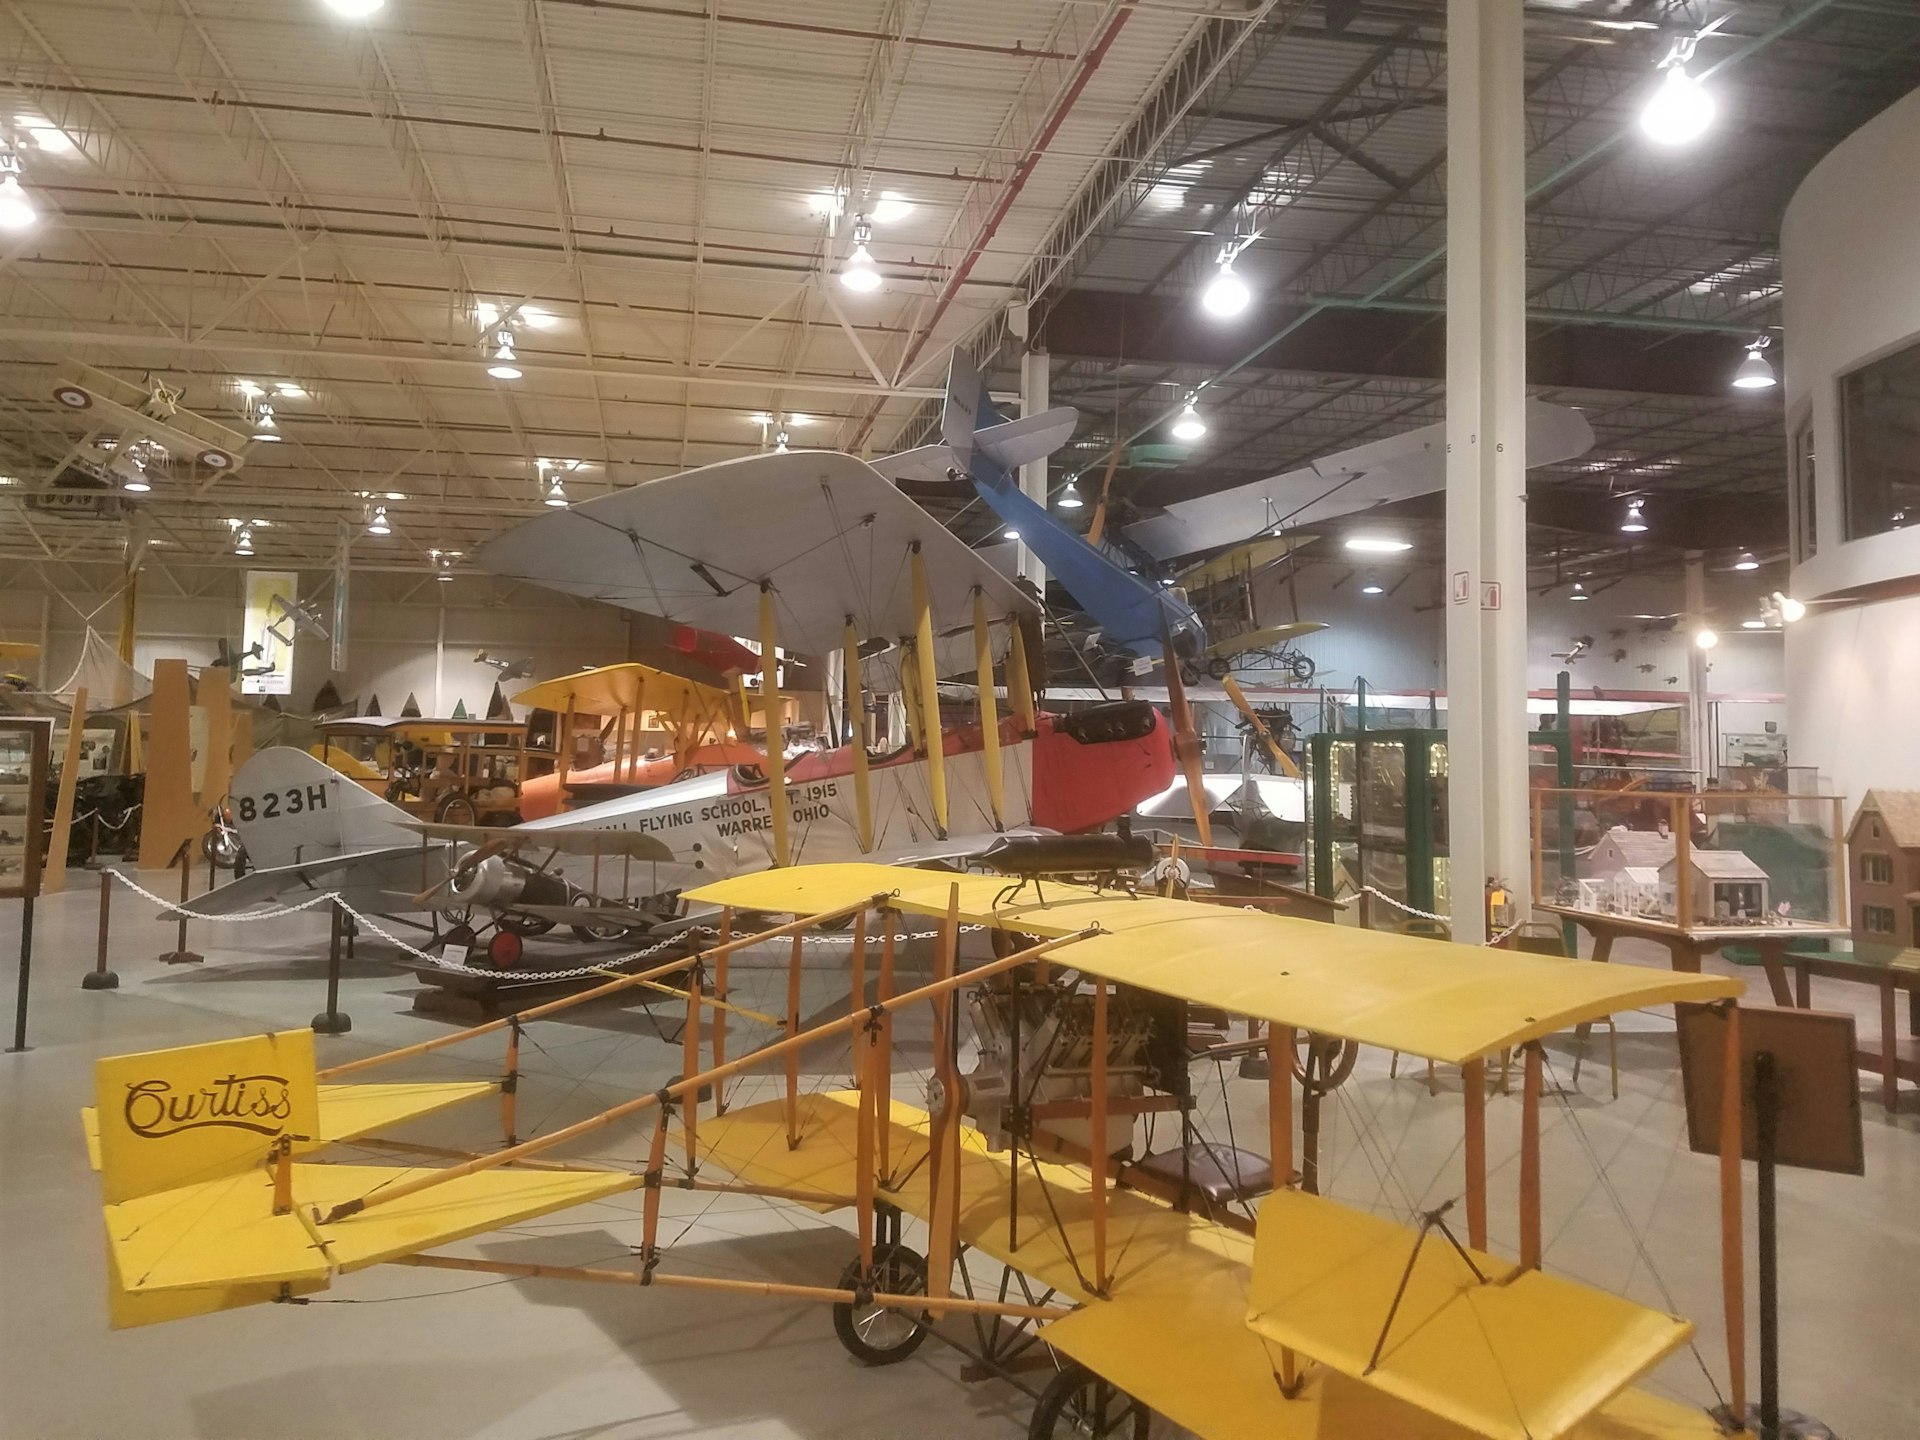 The Glenn H. Curtiss Aviation Museum pays tribute to the father of naval aviation. 